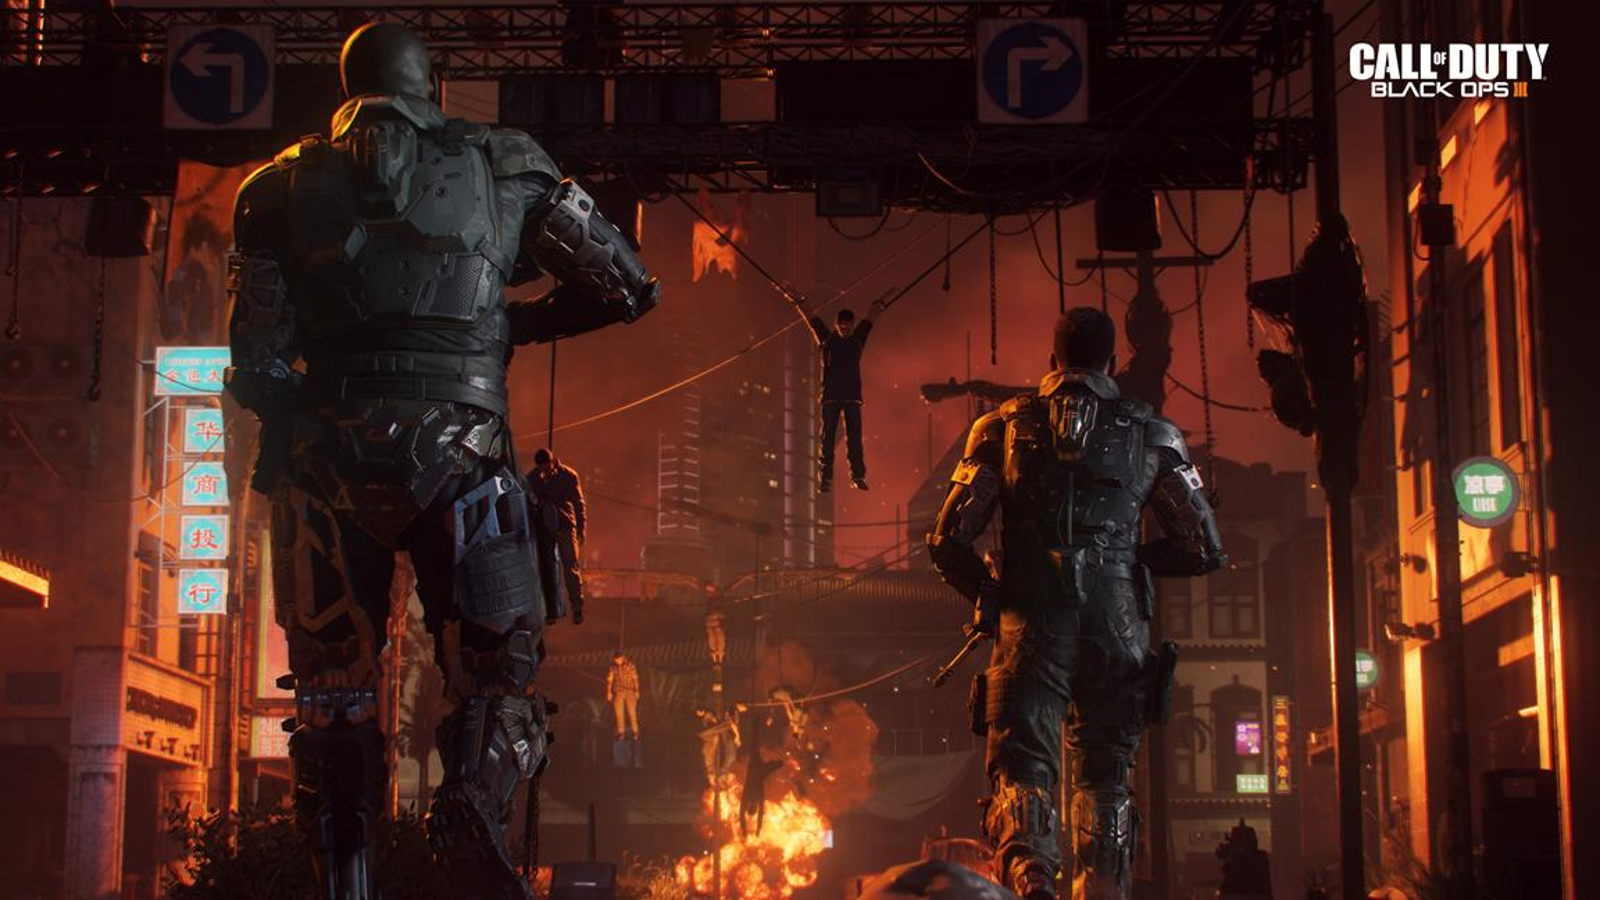 Why Call of Duty: Black Ops 3's entire campaign is unlocked from the start  | VG247